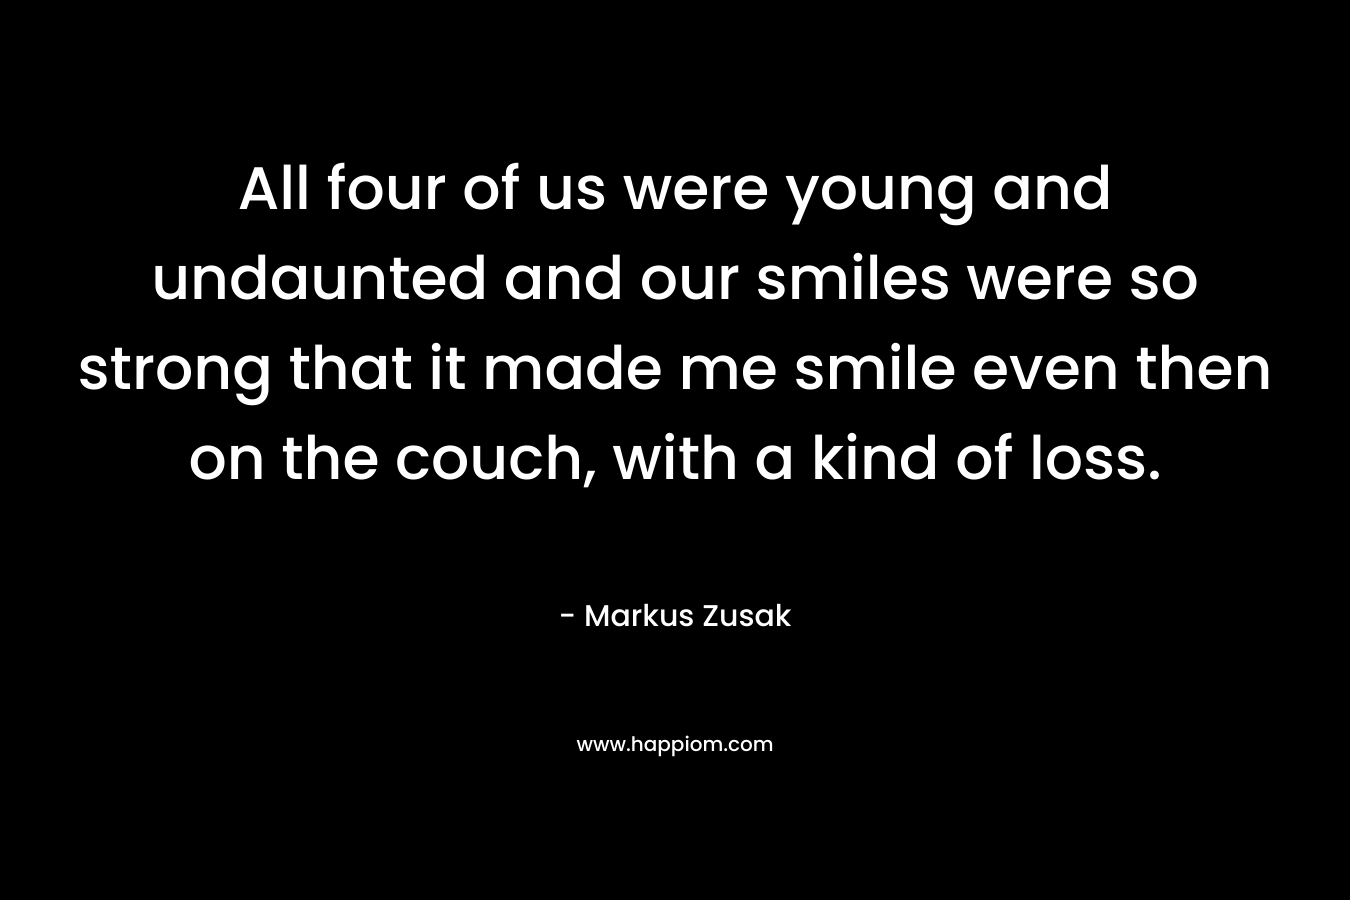 All four of us were young and undaunted and our smiles were so strong that it made me smile even then on the couch, with a kind of loss.